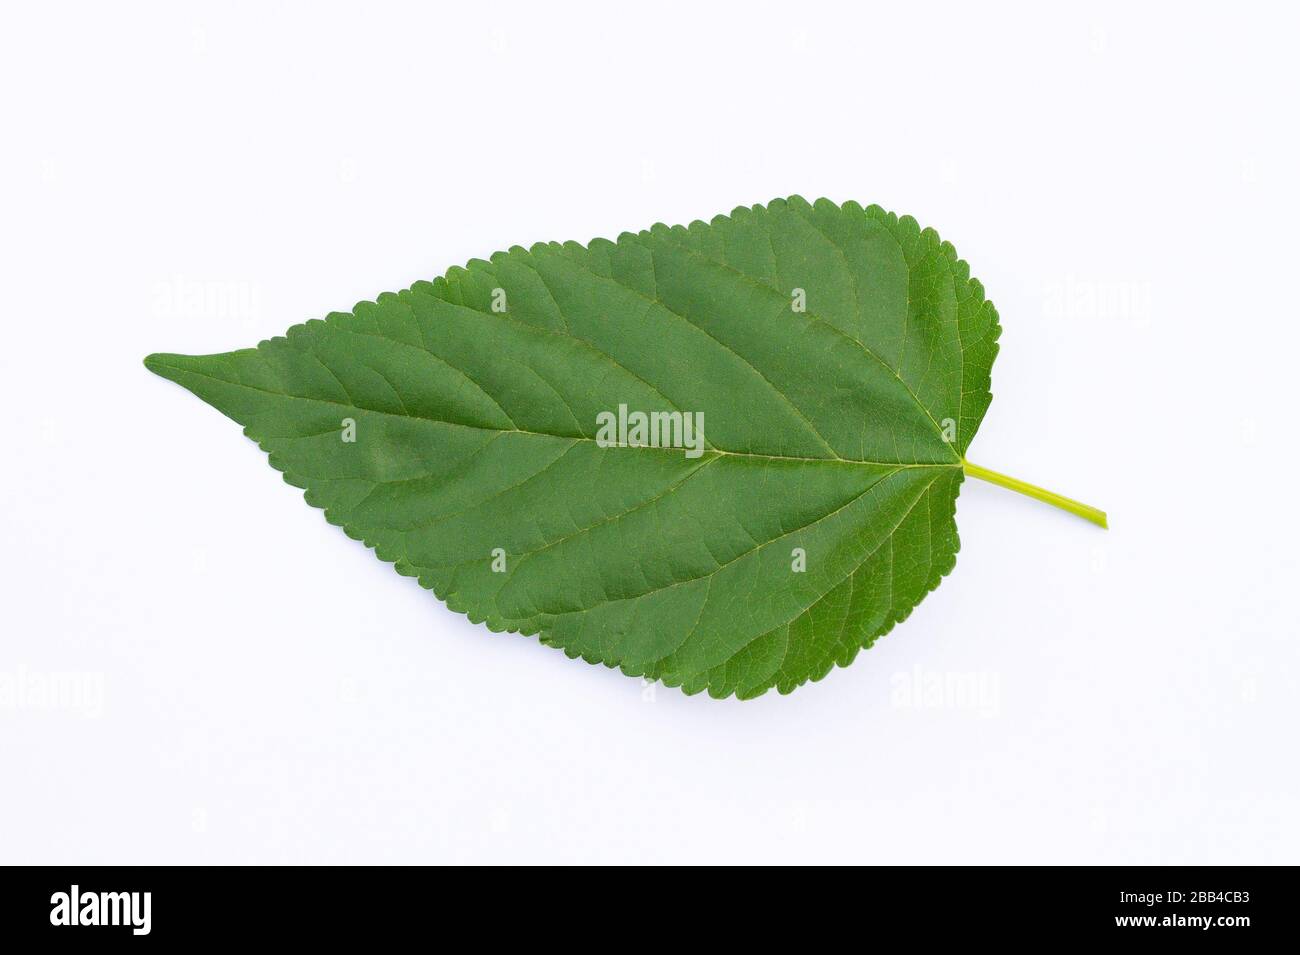 The Mulberry leaf isolate on a white background Stock Photo